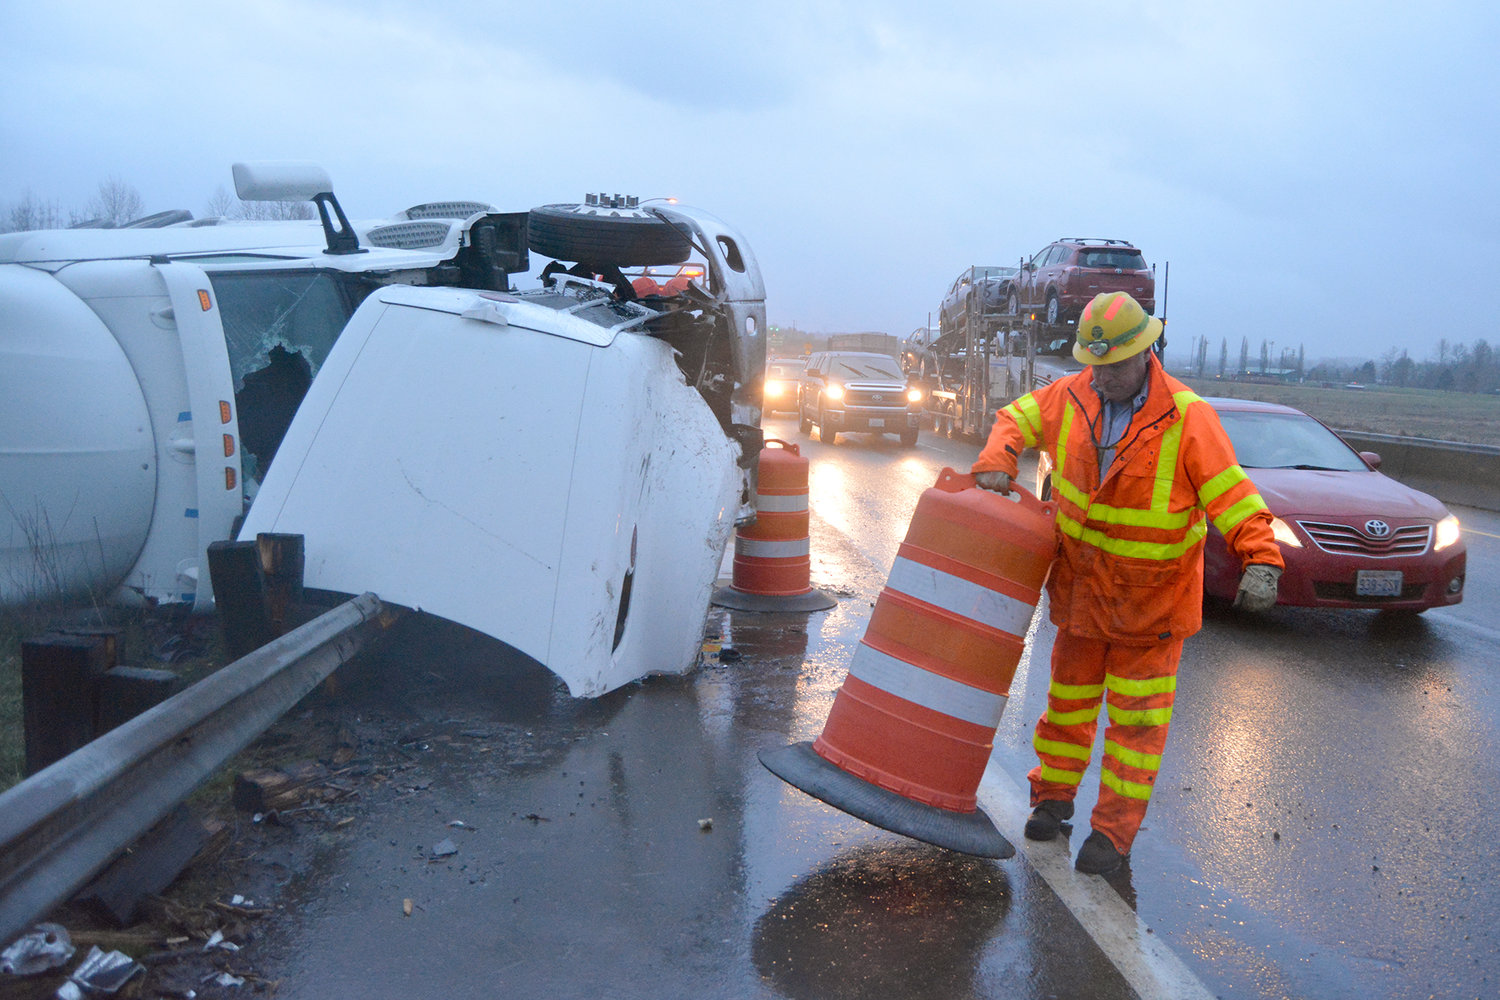 A Washington State Department of Transportation employee puts out road barricades alongside a semi truck that turned onto its side on the northbound lane of Interstate 5 at mile post 76 on Tuesday morning in Chehalis.